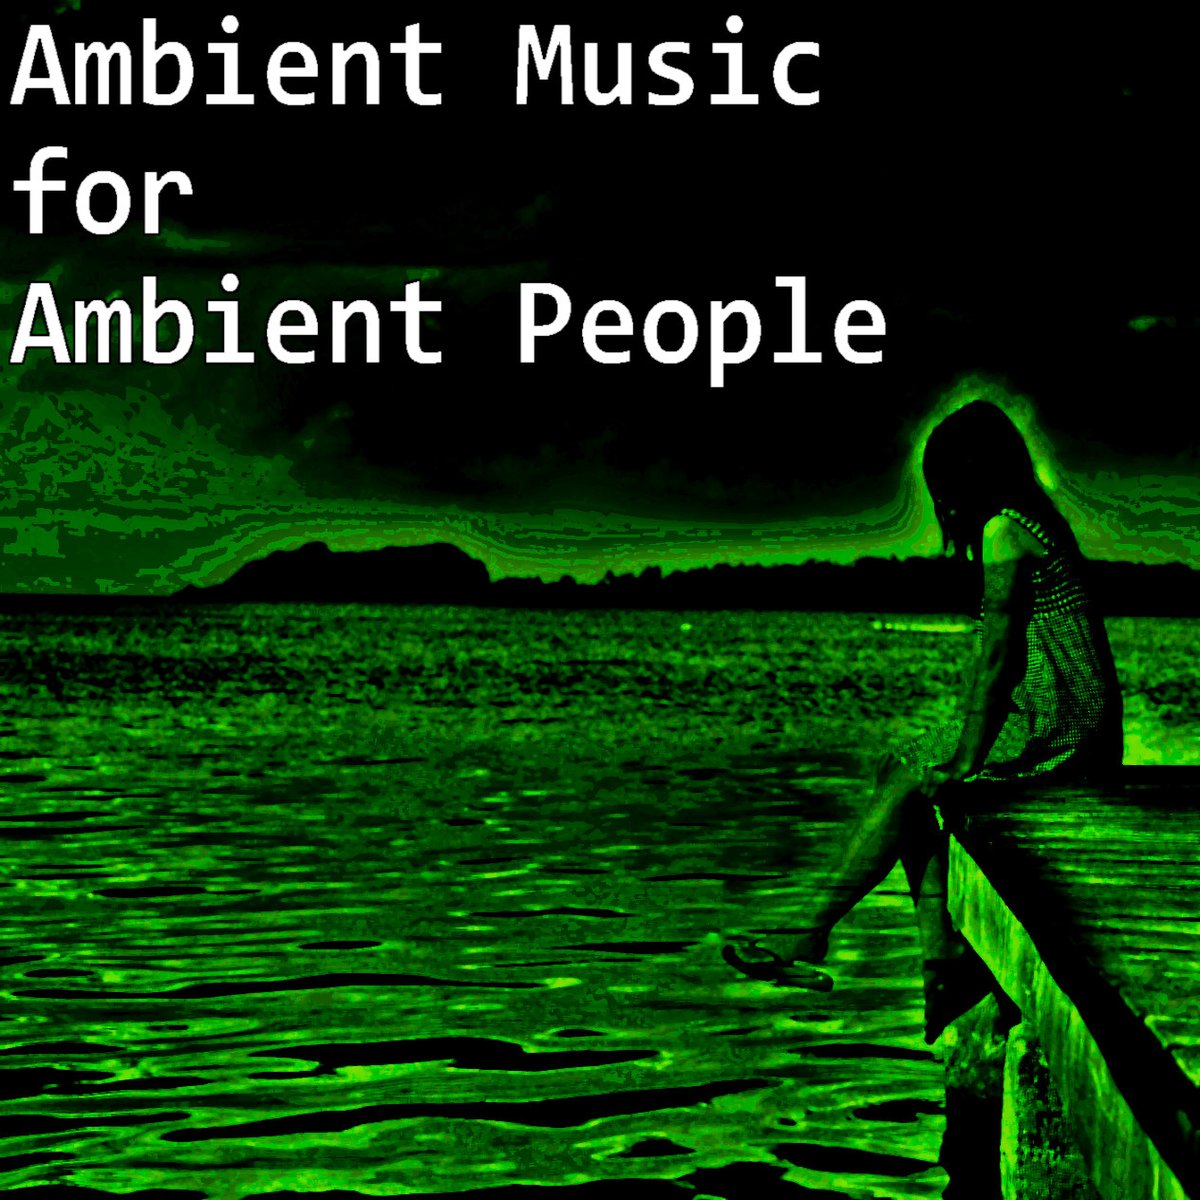 Heya, I just updated our ambient playlist on spotify! There are 100 beautiful tracks for you to check out, full of talented artists from all over the world. Give it a listen when you get a chance! #ambient #experimental open.spotify.com/playlist/29CE3…